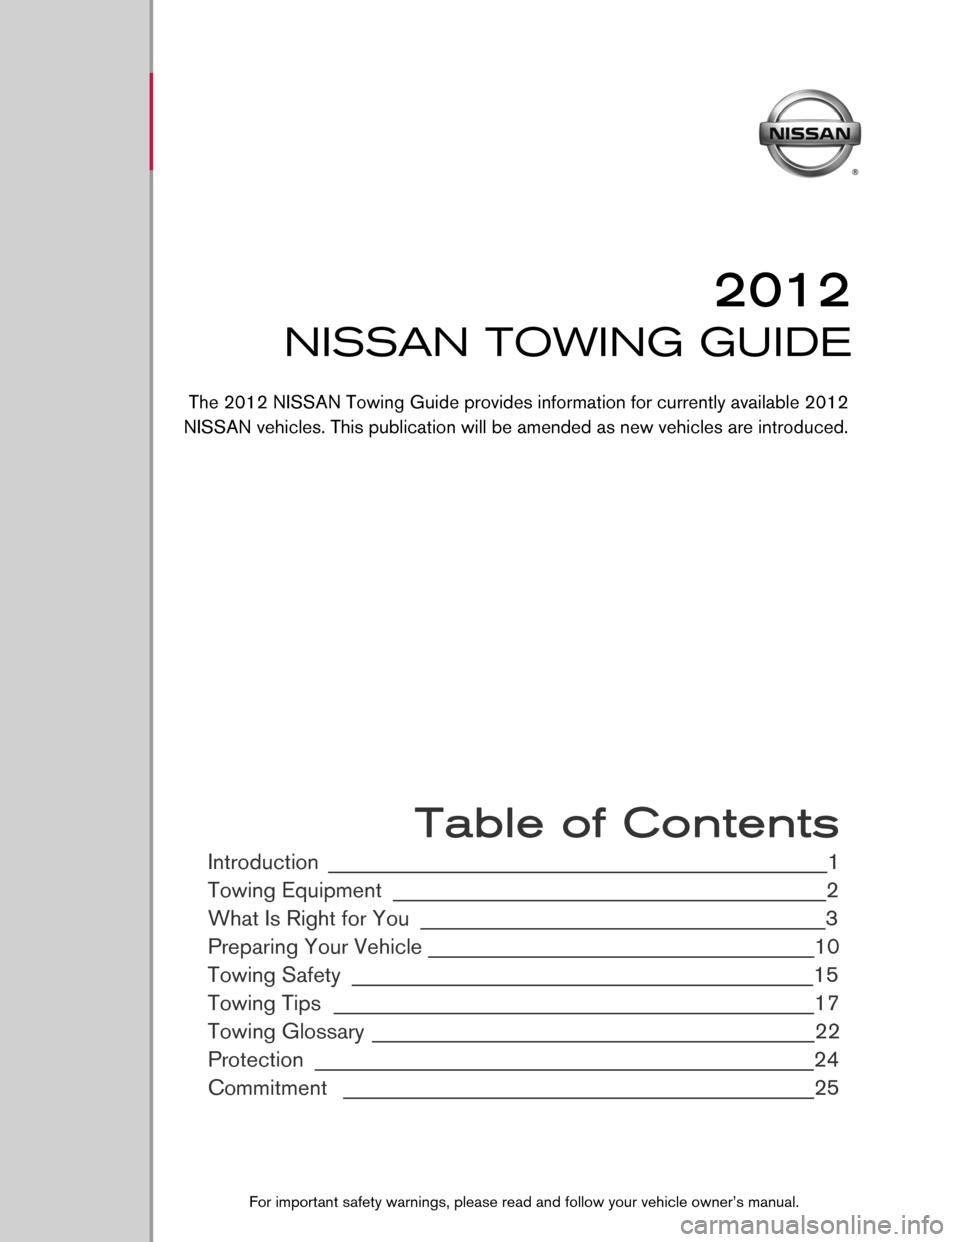 NISSAN XTERRA 2012 N50 / 2.G Towing Guide 9
2012
NISSAN TOWING GUIDE
 Table of Contents
Introduction _____________________________________________________1 
Towing Equipment
 ______________________________________________2 
What Is Right for 